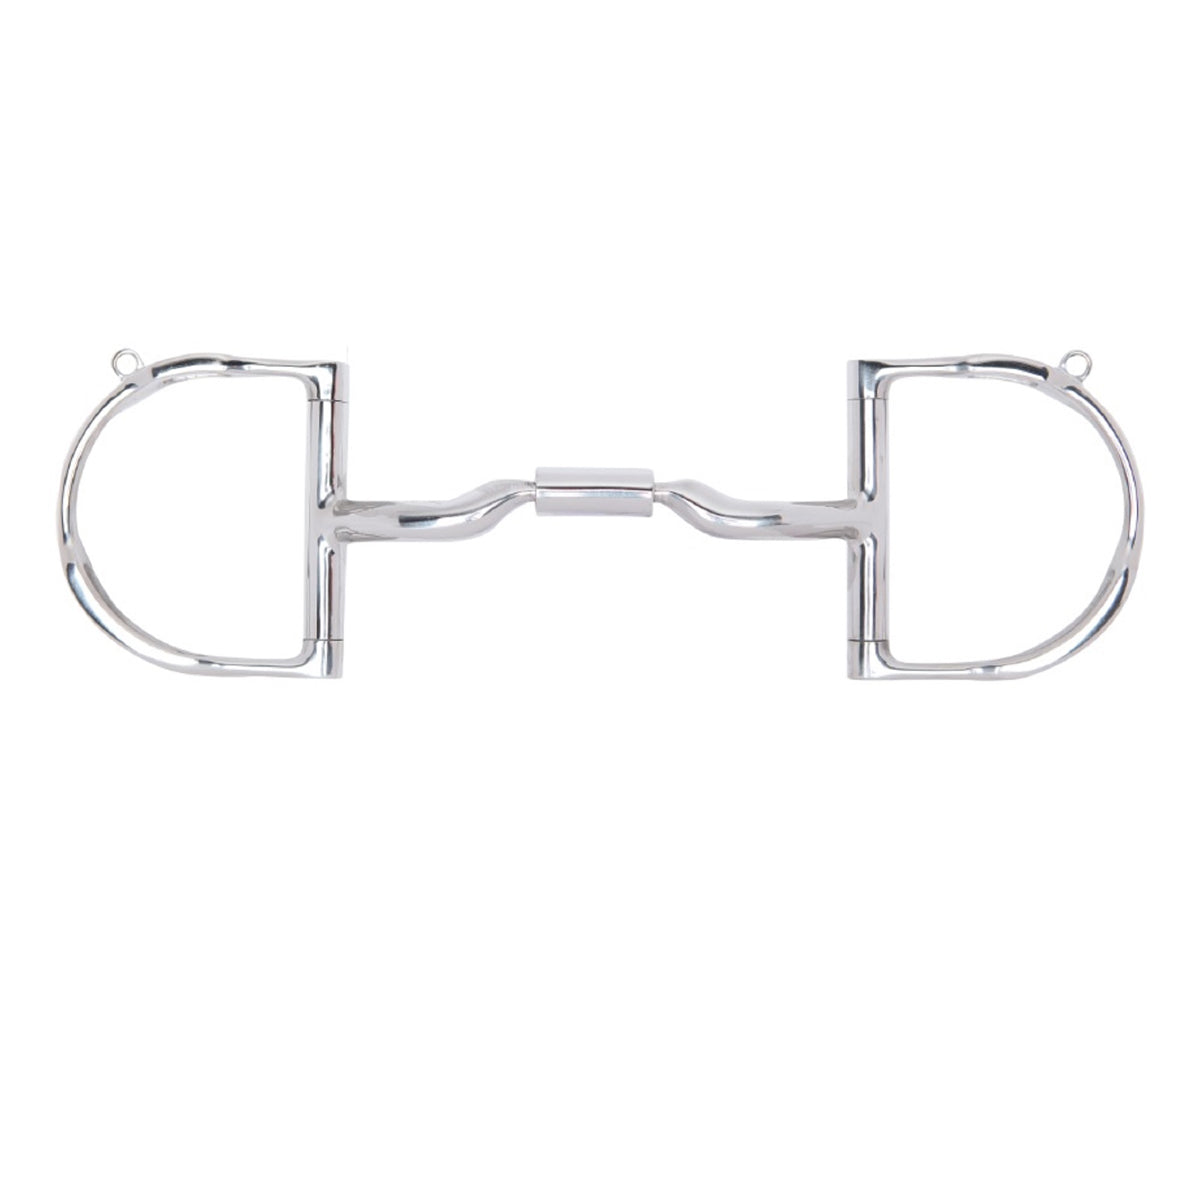 Myler 3 3/8" Medium Dee with Hooks with Low Port Comfort Snaffle MB 04